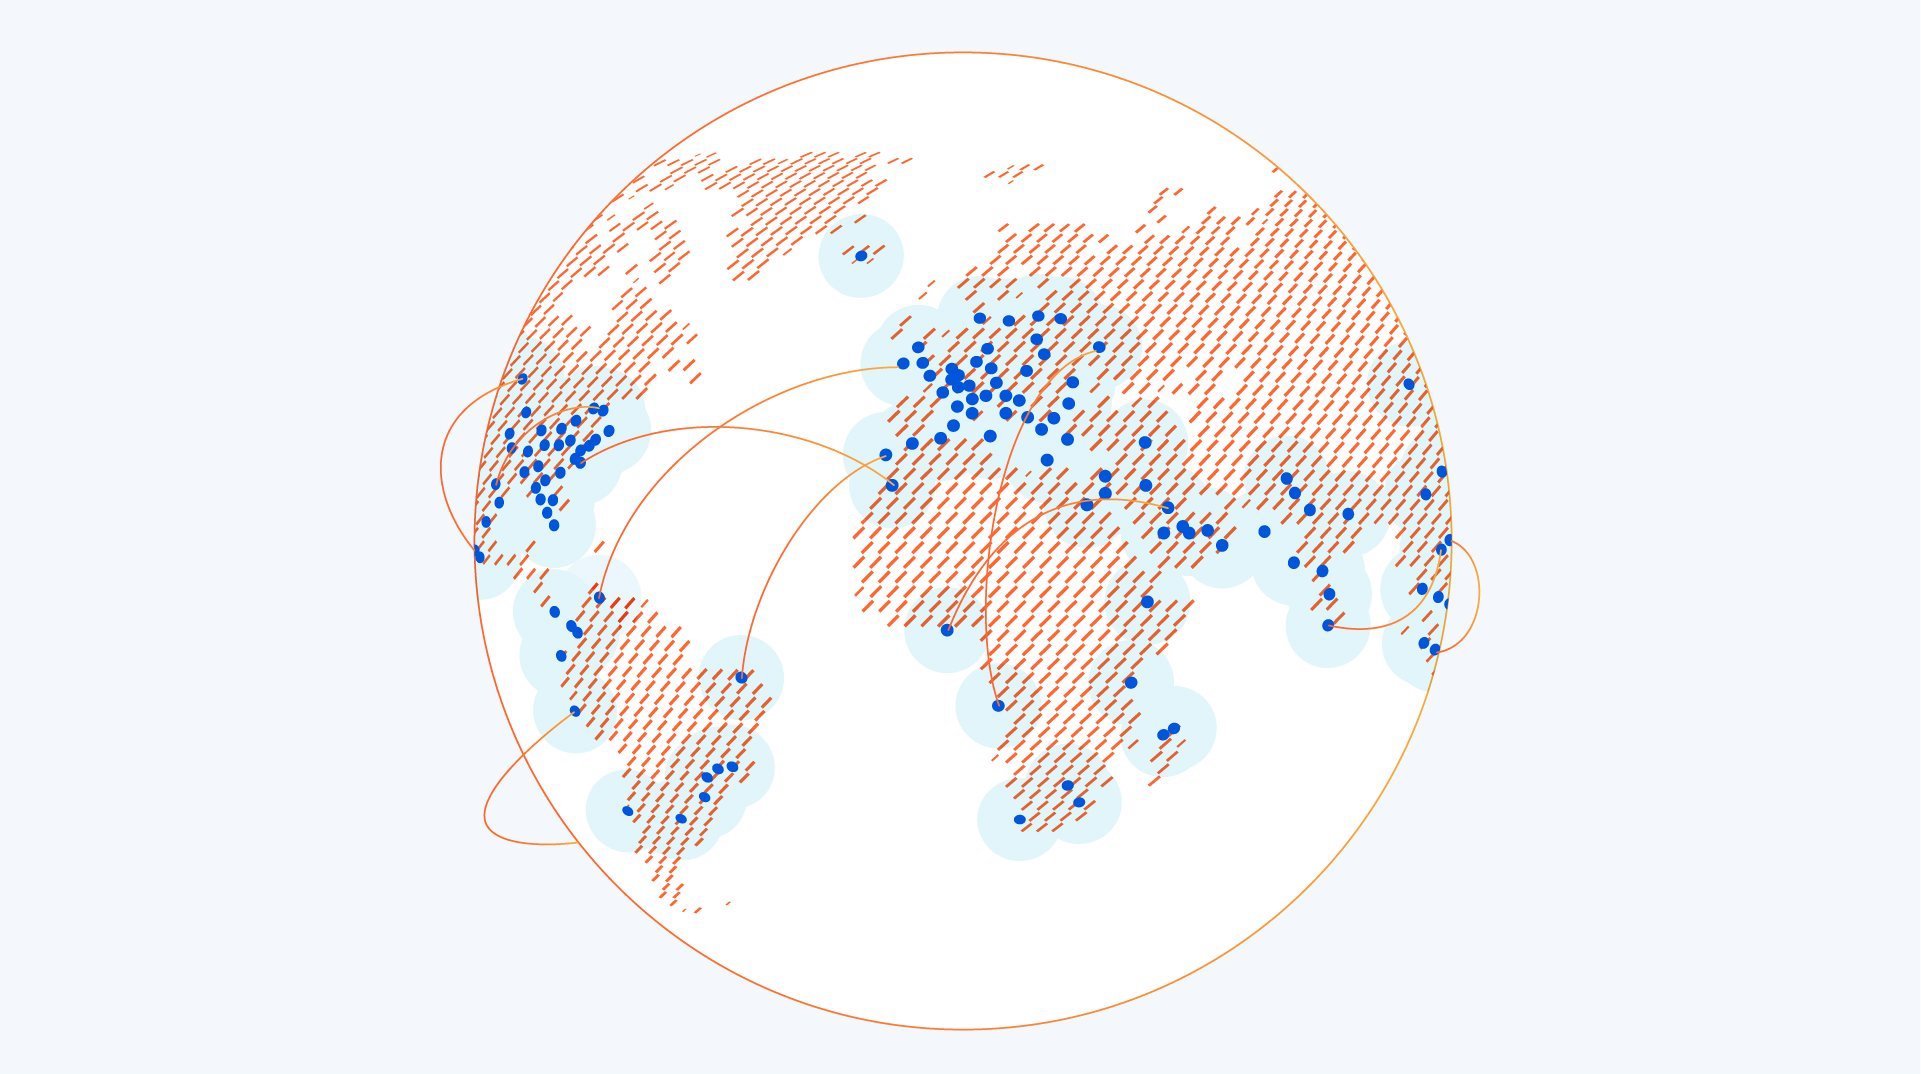 Threat hunting with insights from Cloudlare’s 2.5M+ customers and presence in 200+ cities around the world.  